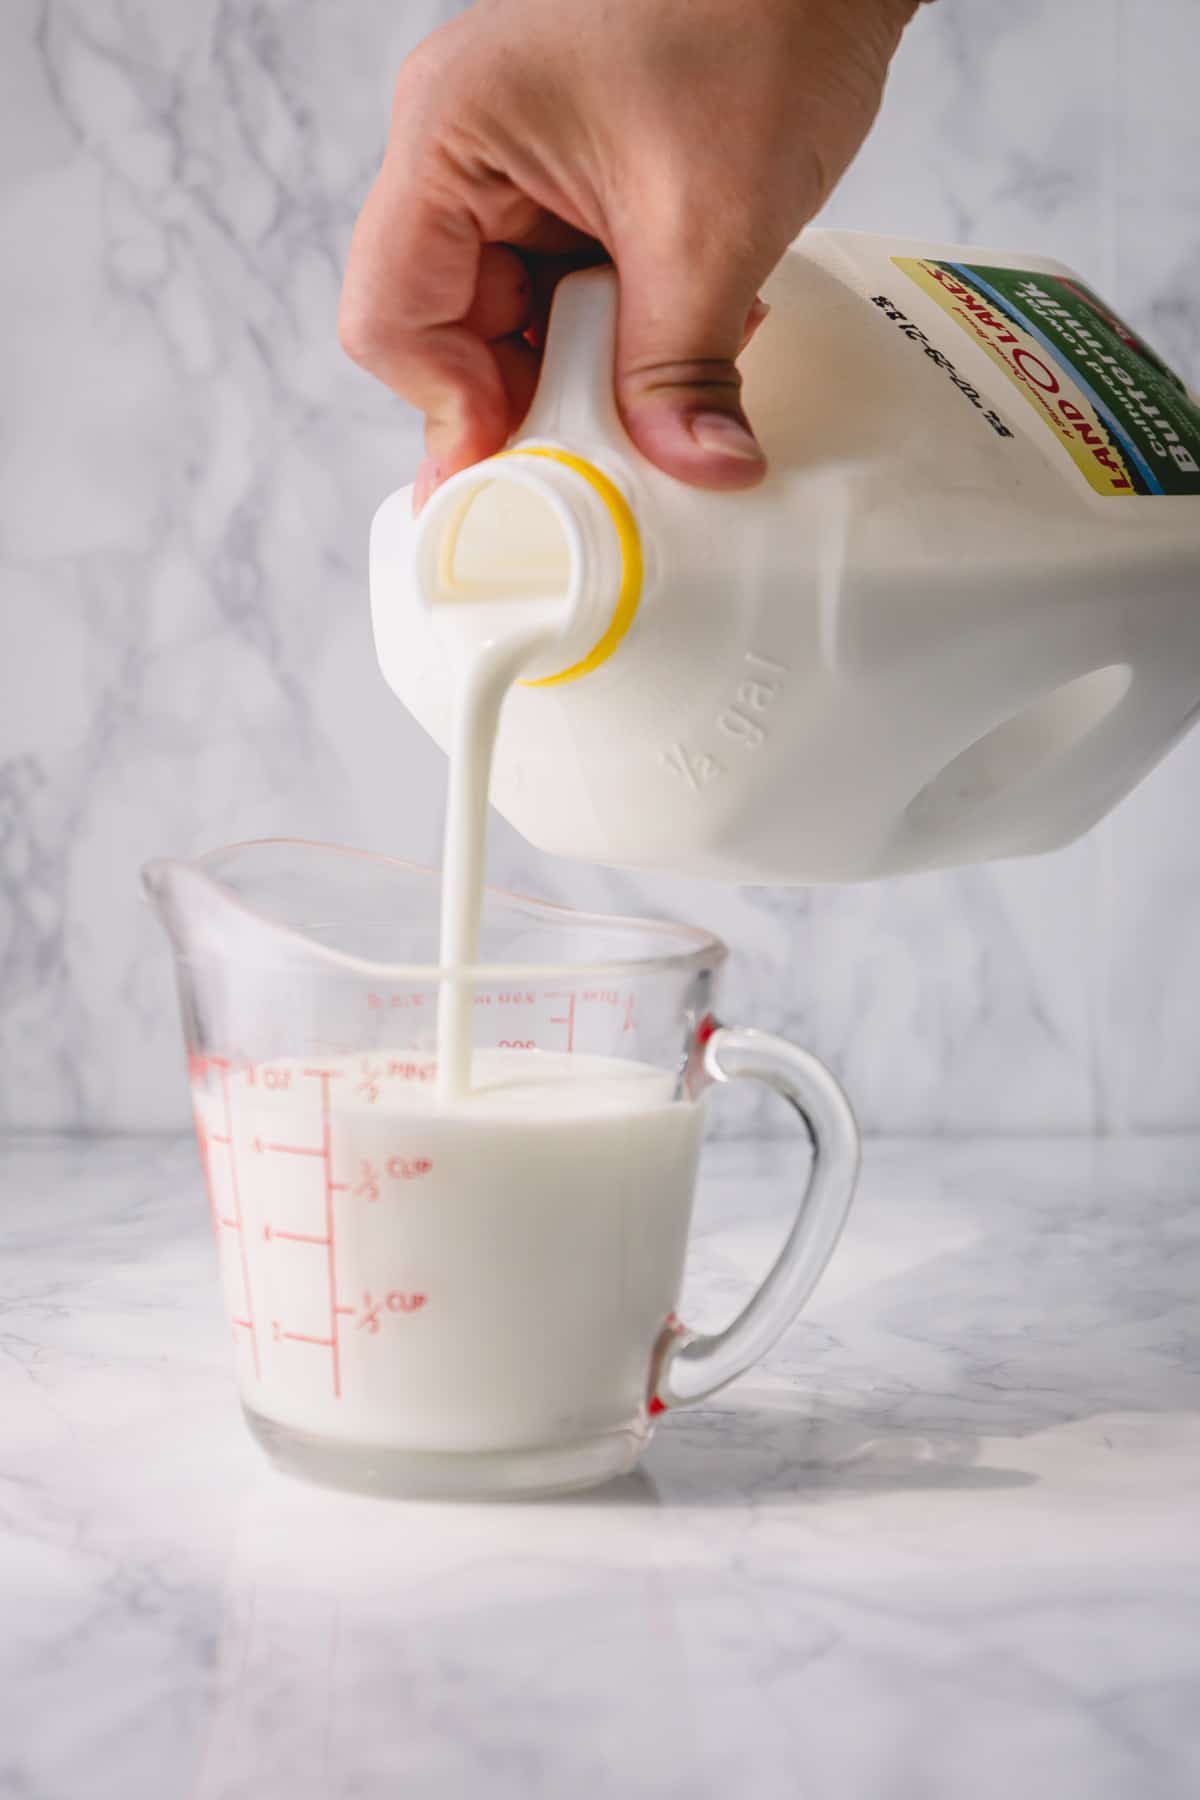 Buttermilk poured into a measuring cup.